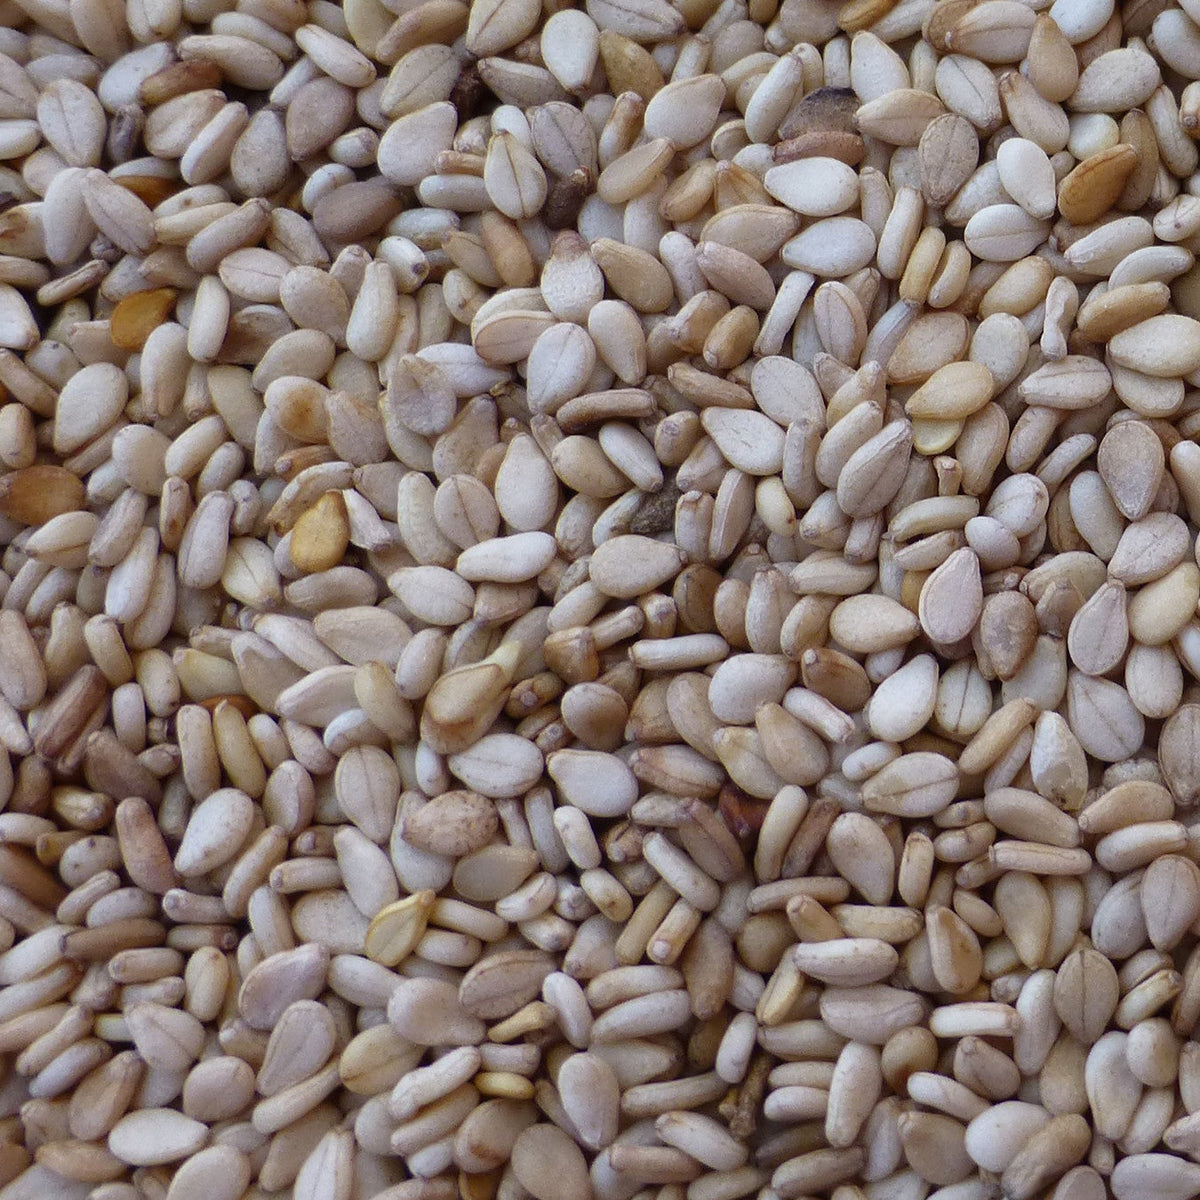 What Is Sesame Seed?